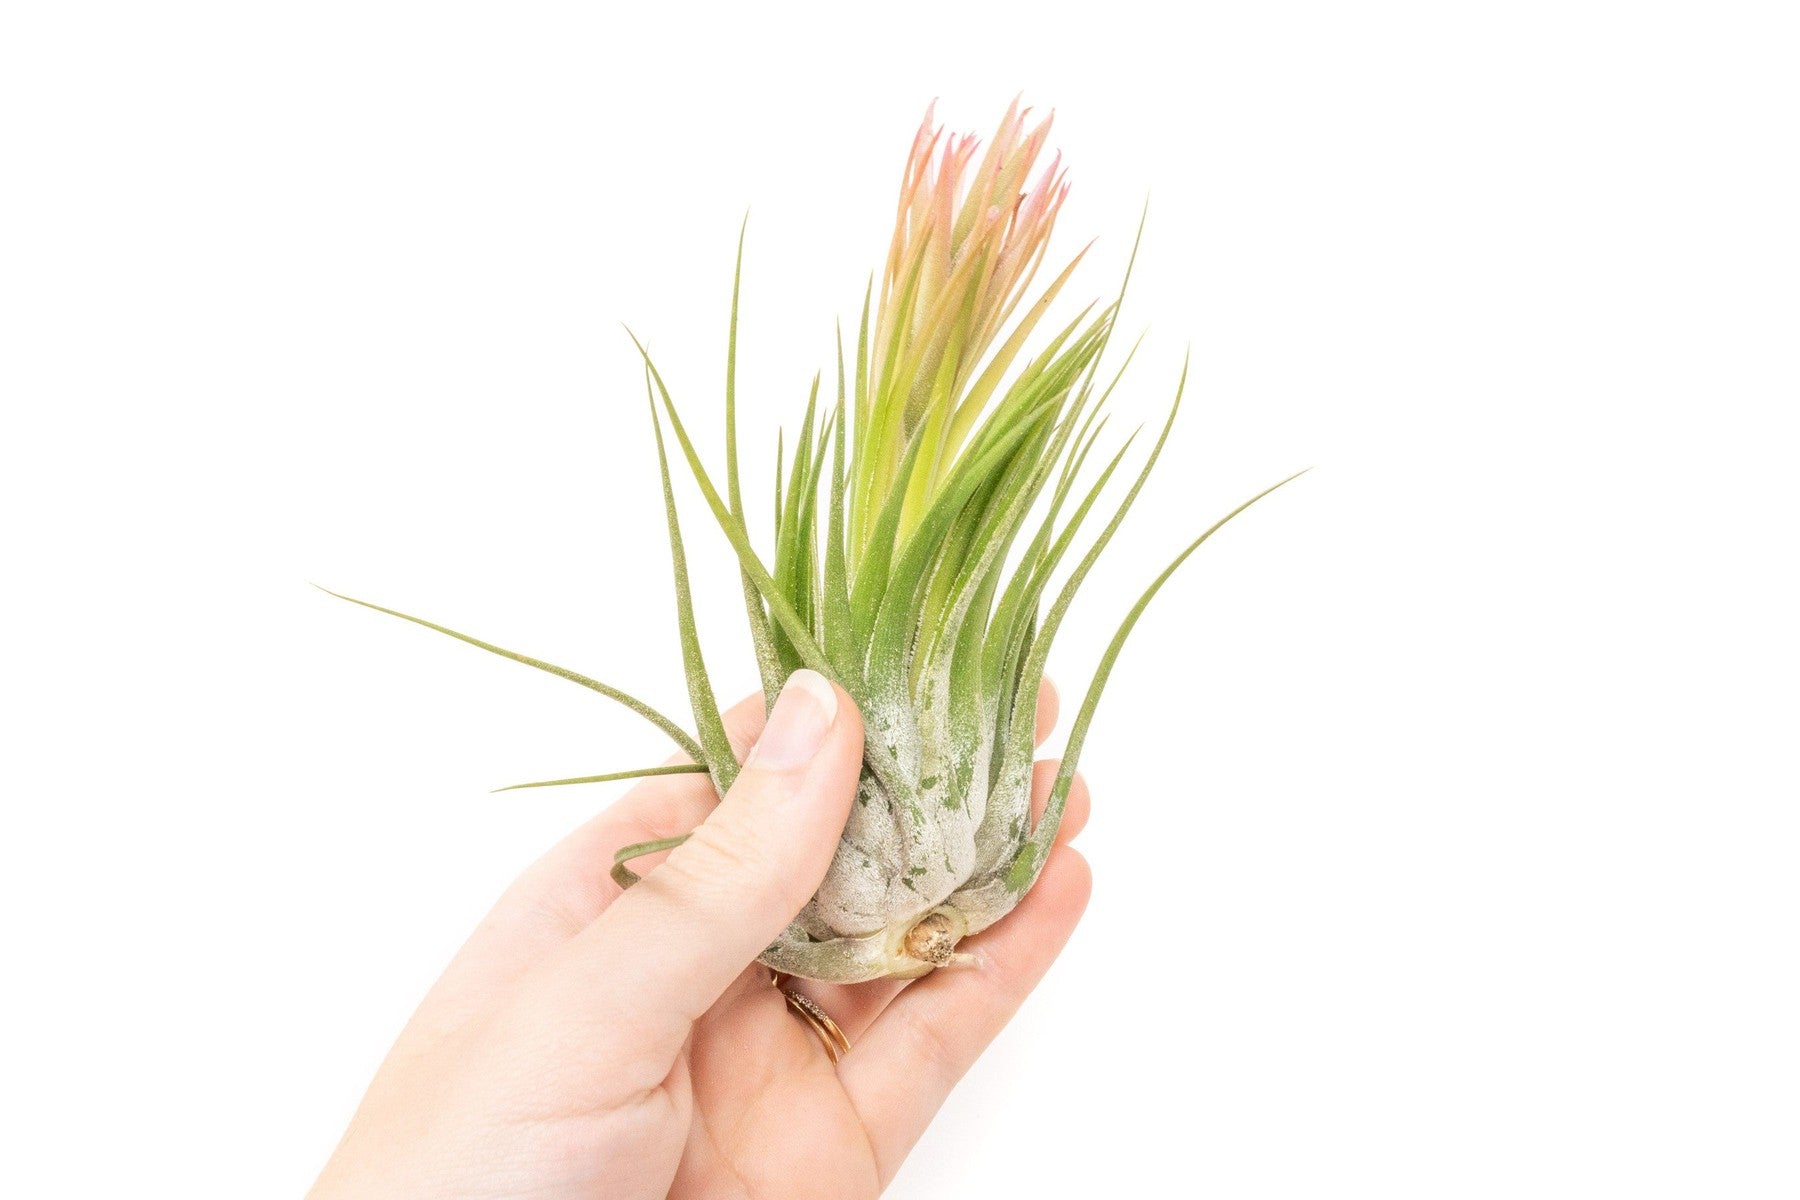 SALE - Large Tillandsia Ionantha Scaposa - Set of 10 or 20 Air Plants - 40% Off-airplant-The Succulent Source